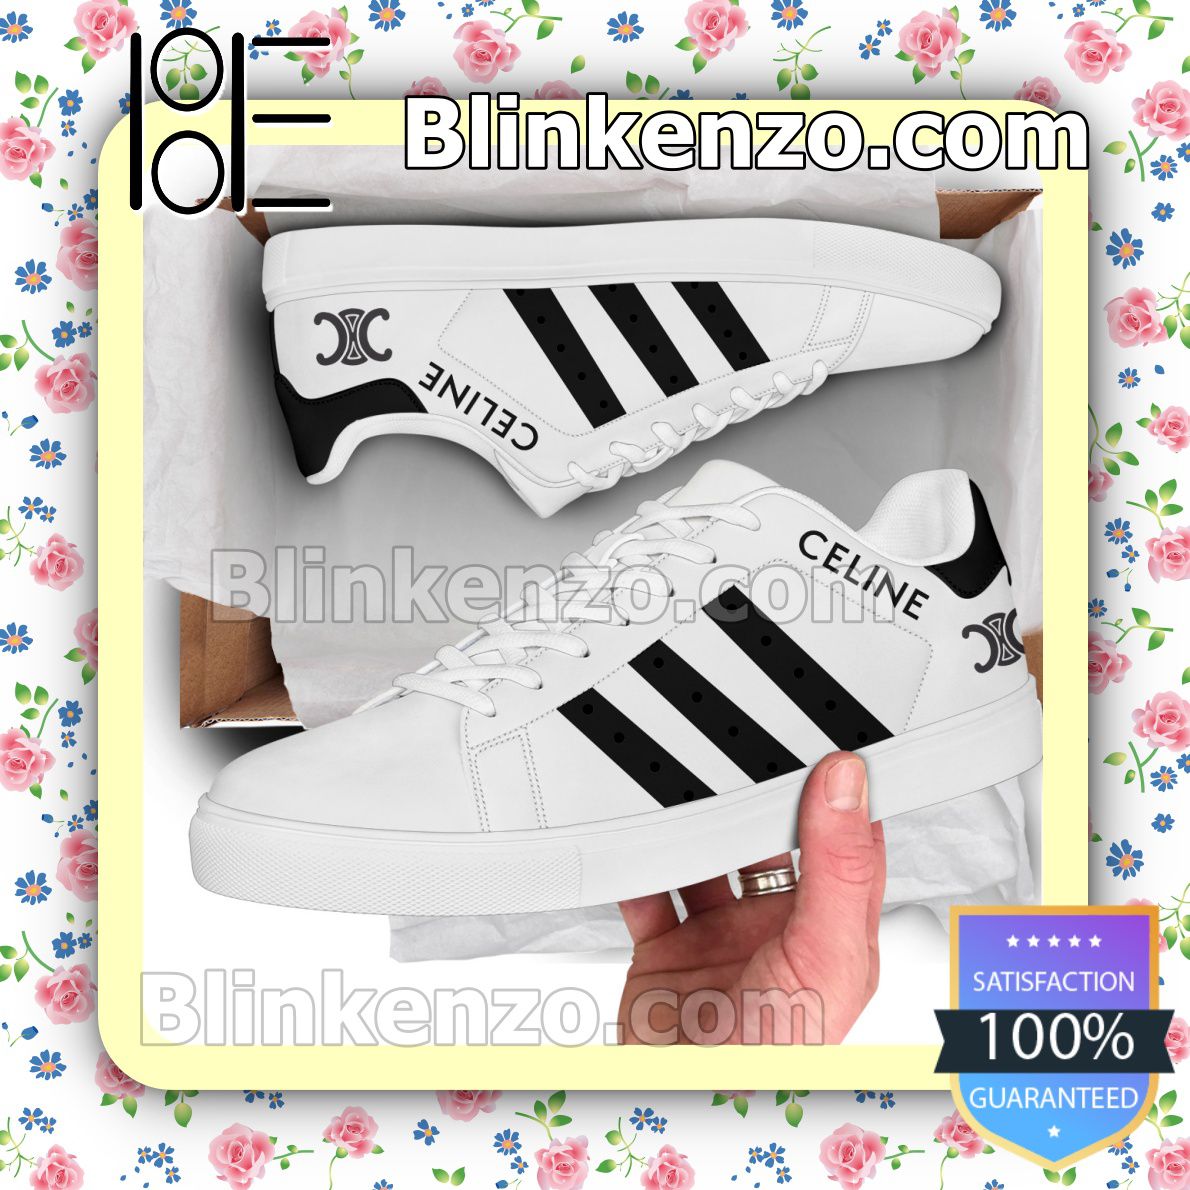 Celine Company Brand Adidas Low Top Shoes